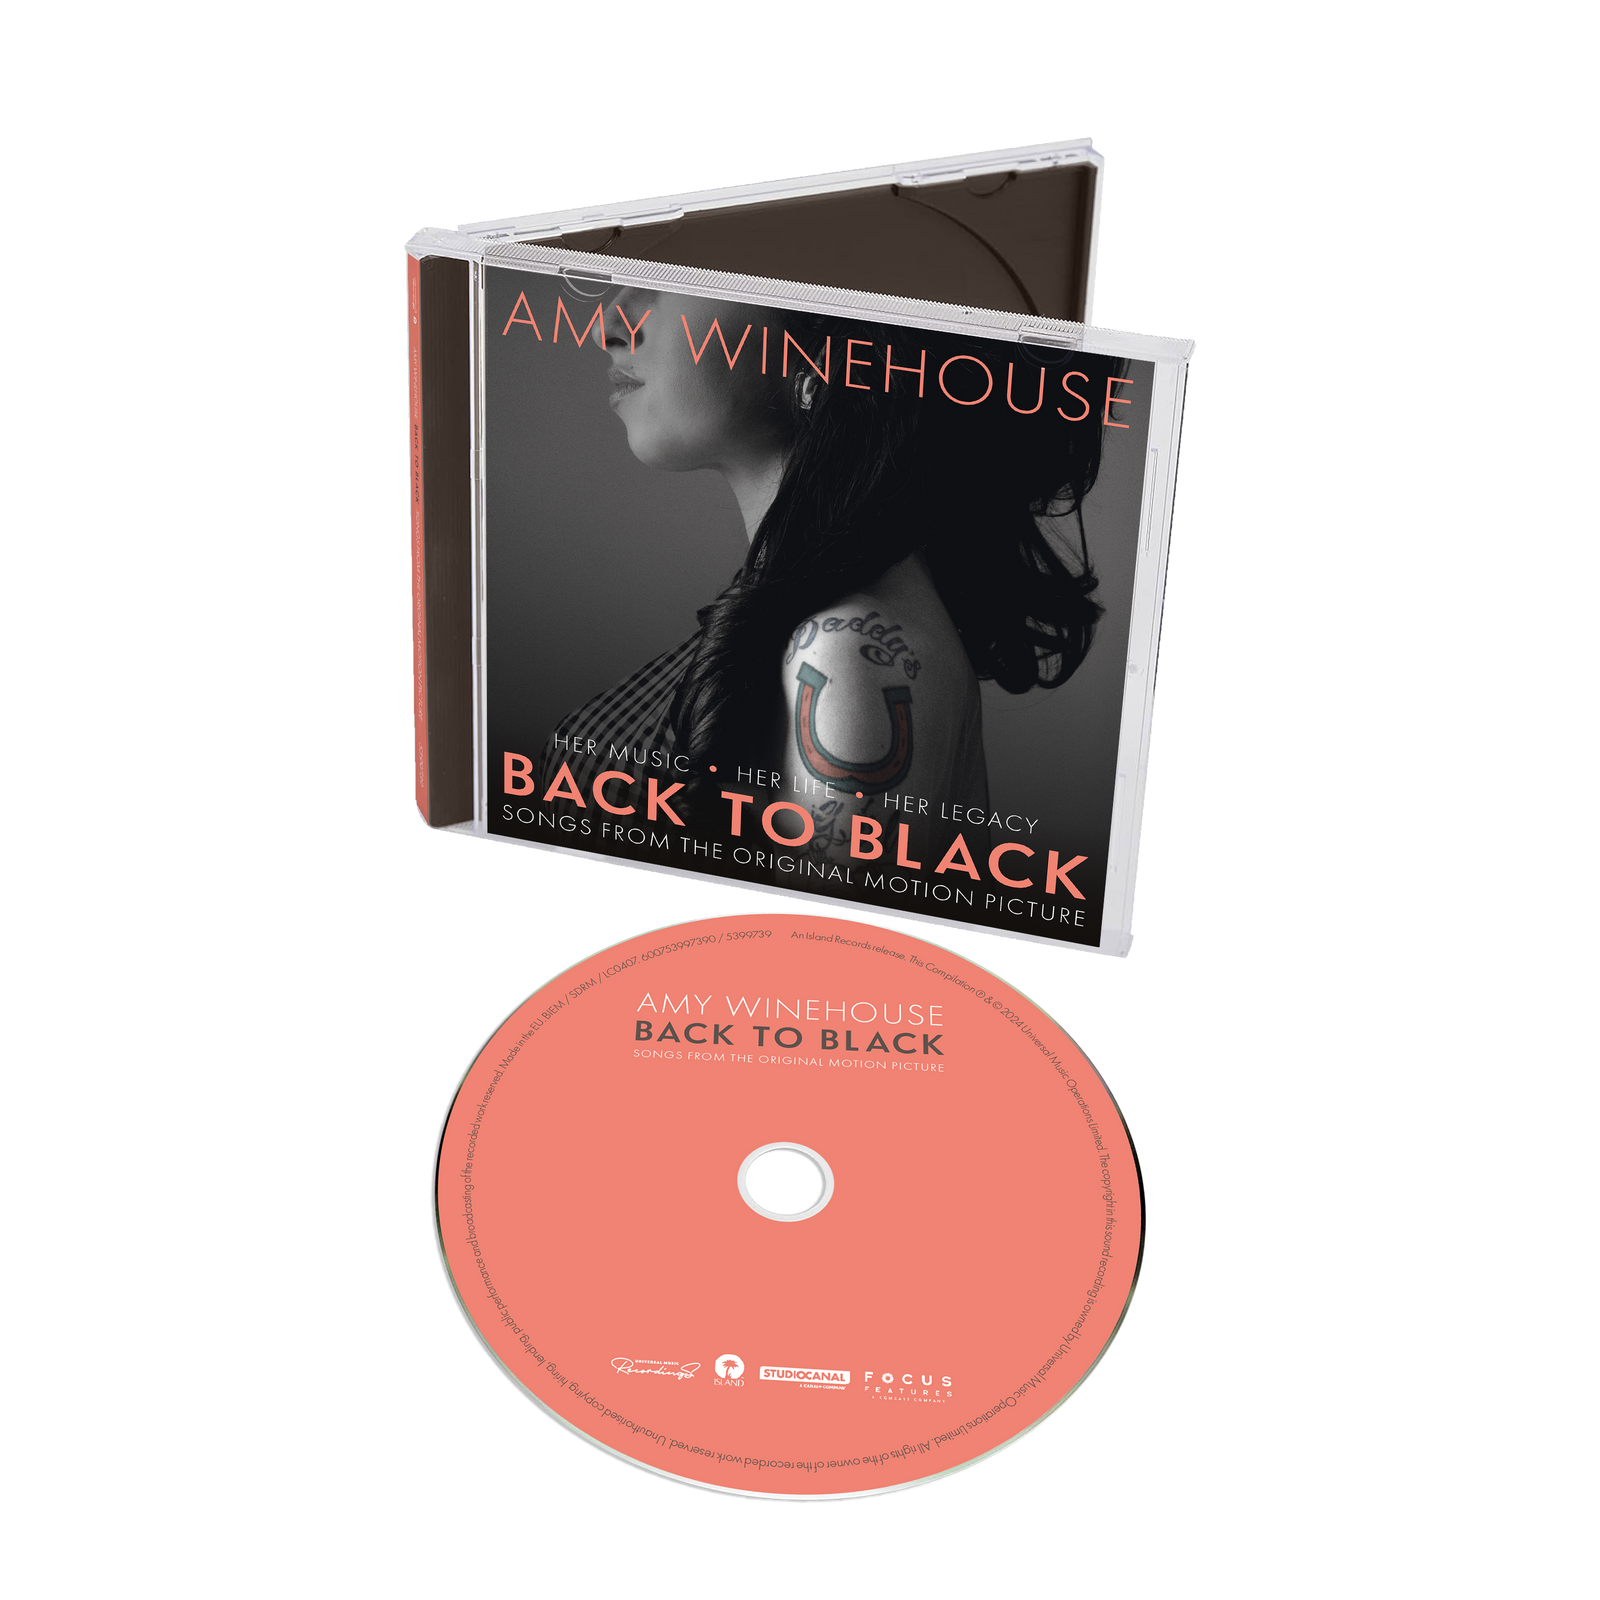 CD Shop - OST BACK TO BLACK: SONGS FROM THE ORIGINAL MOTION PICTURE